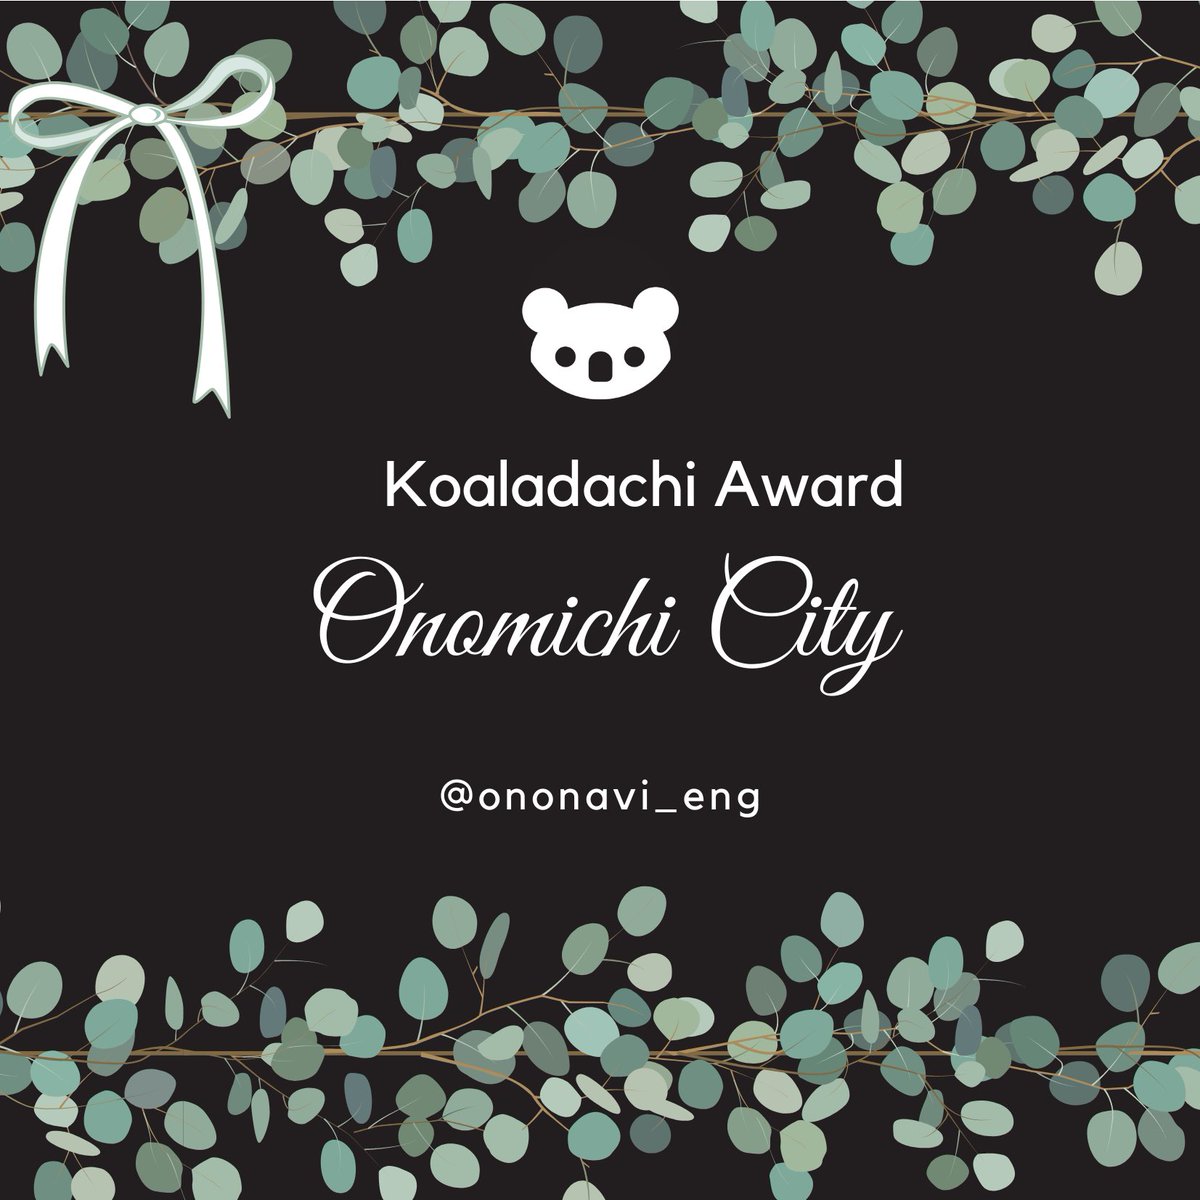 This week’s #koaladachi Award goes to Onomichi in Hiroshima Pref. @ononavi_eng is a must-go destination if you are looking to experience #GreenSlowMobility 
#RegionalRevitalization #InnovationJapan #MaaS #sustainablecities #SDGs @nichigonetwork